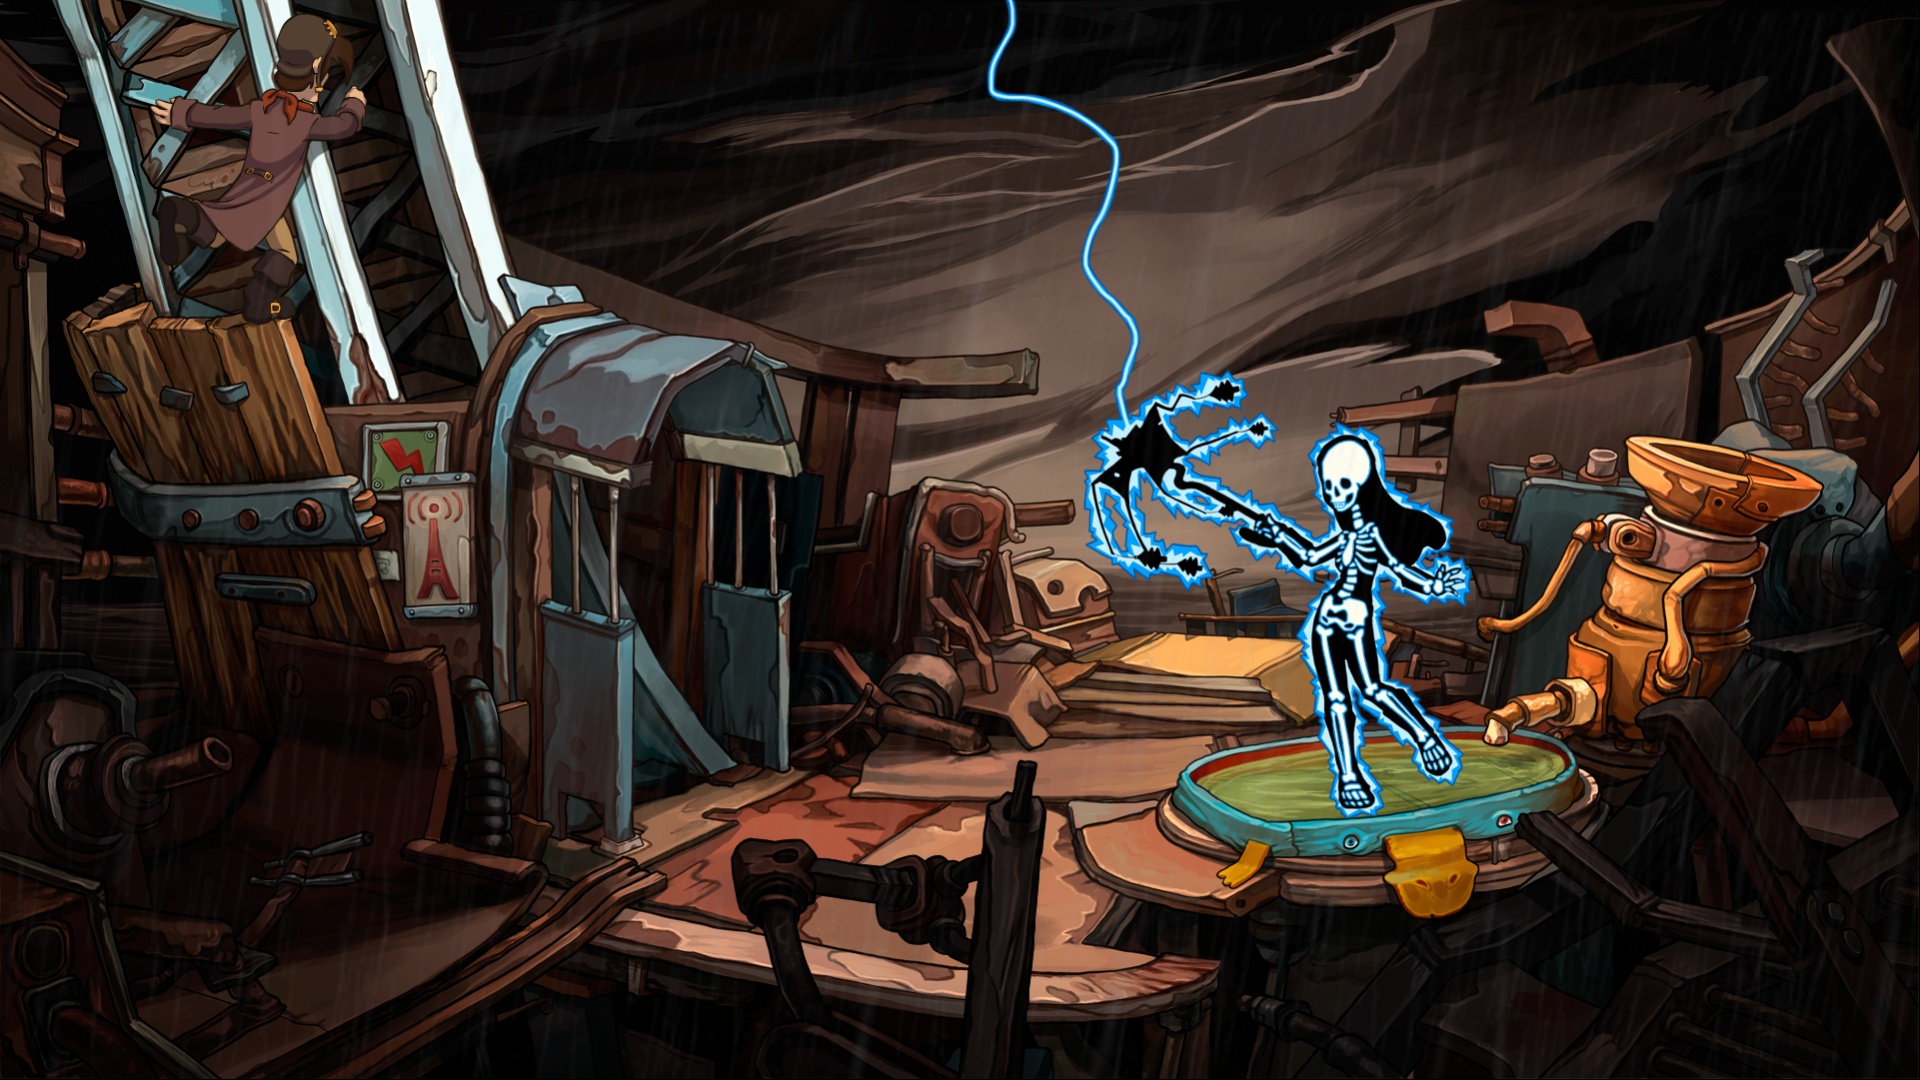 Chaos on deponia steam фото 59